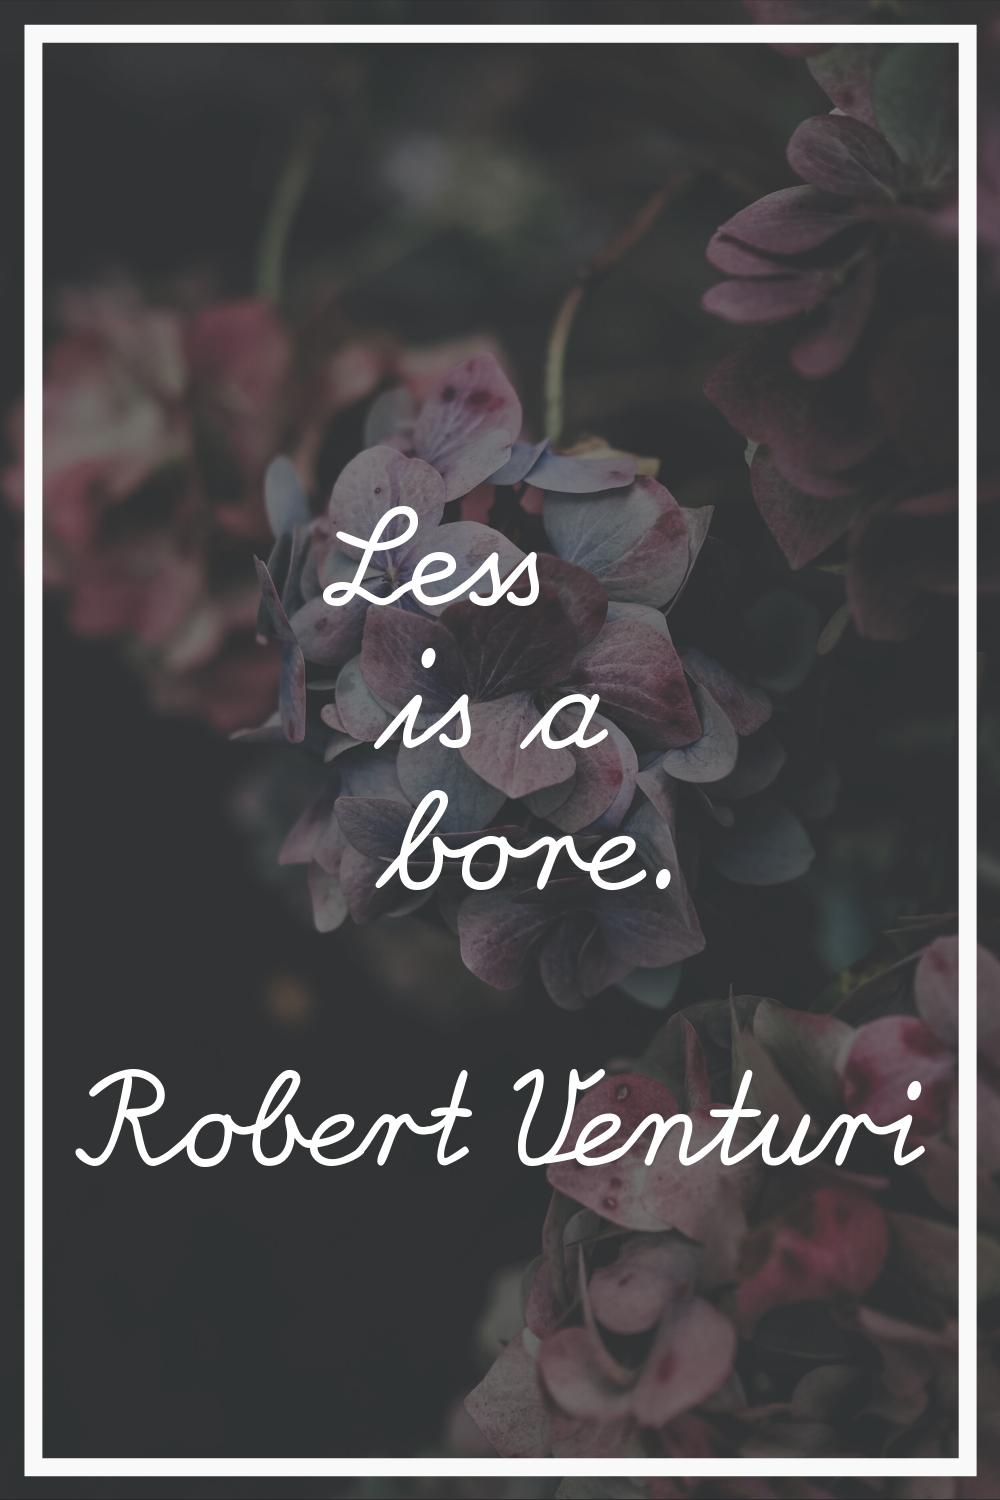 Less is a bore.